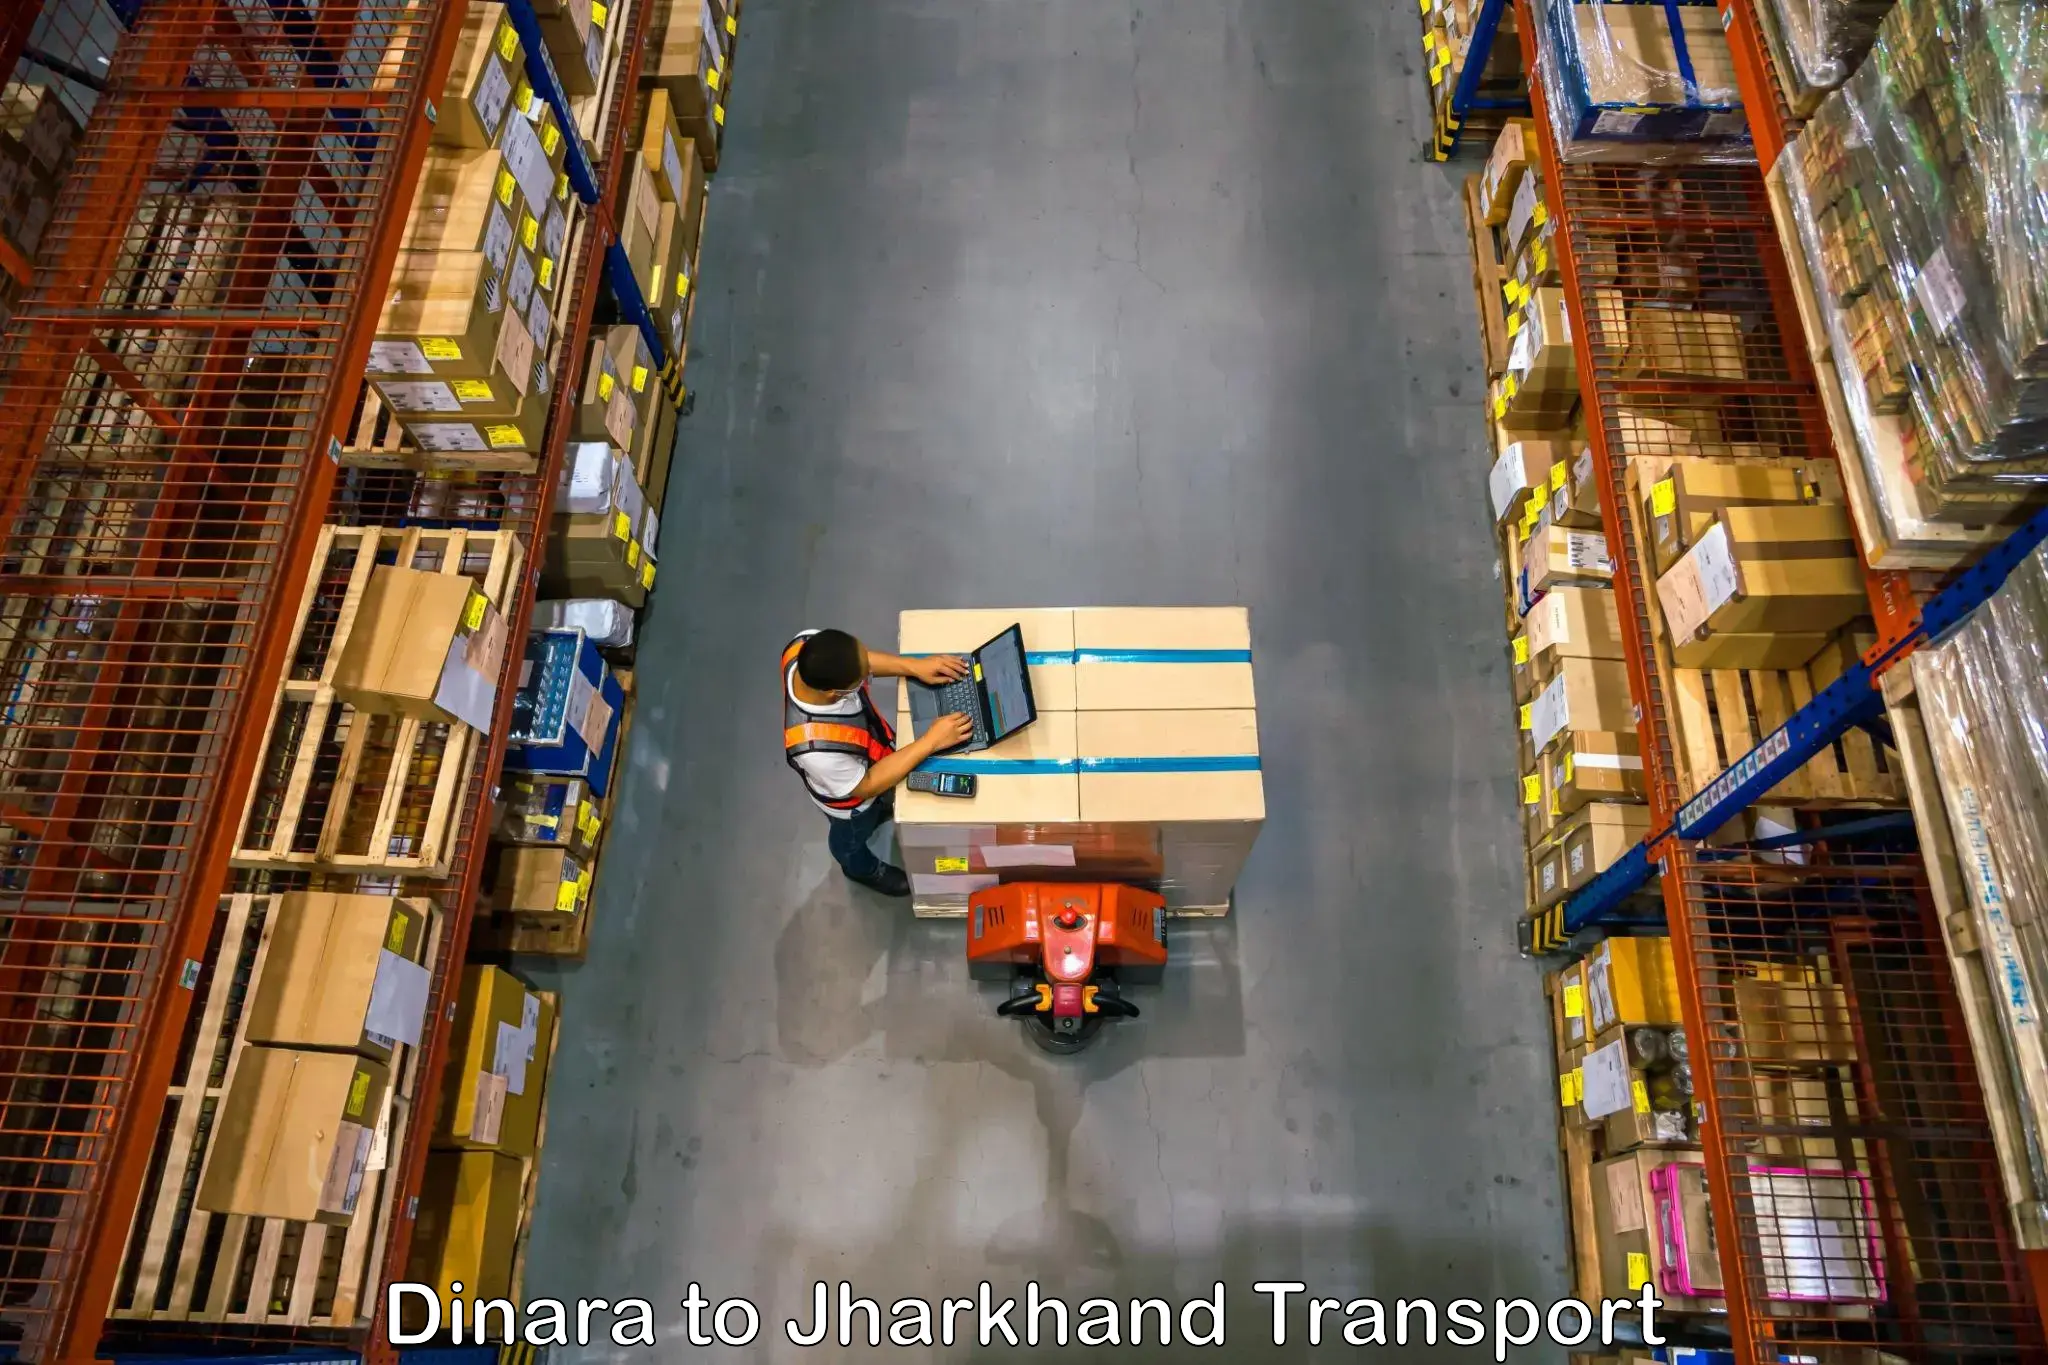 Part load transport service in India Dinara to Jharkhand